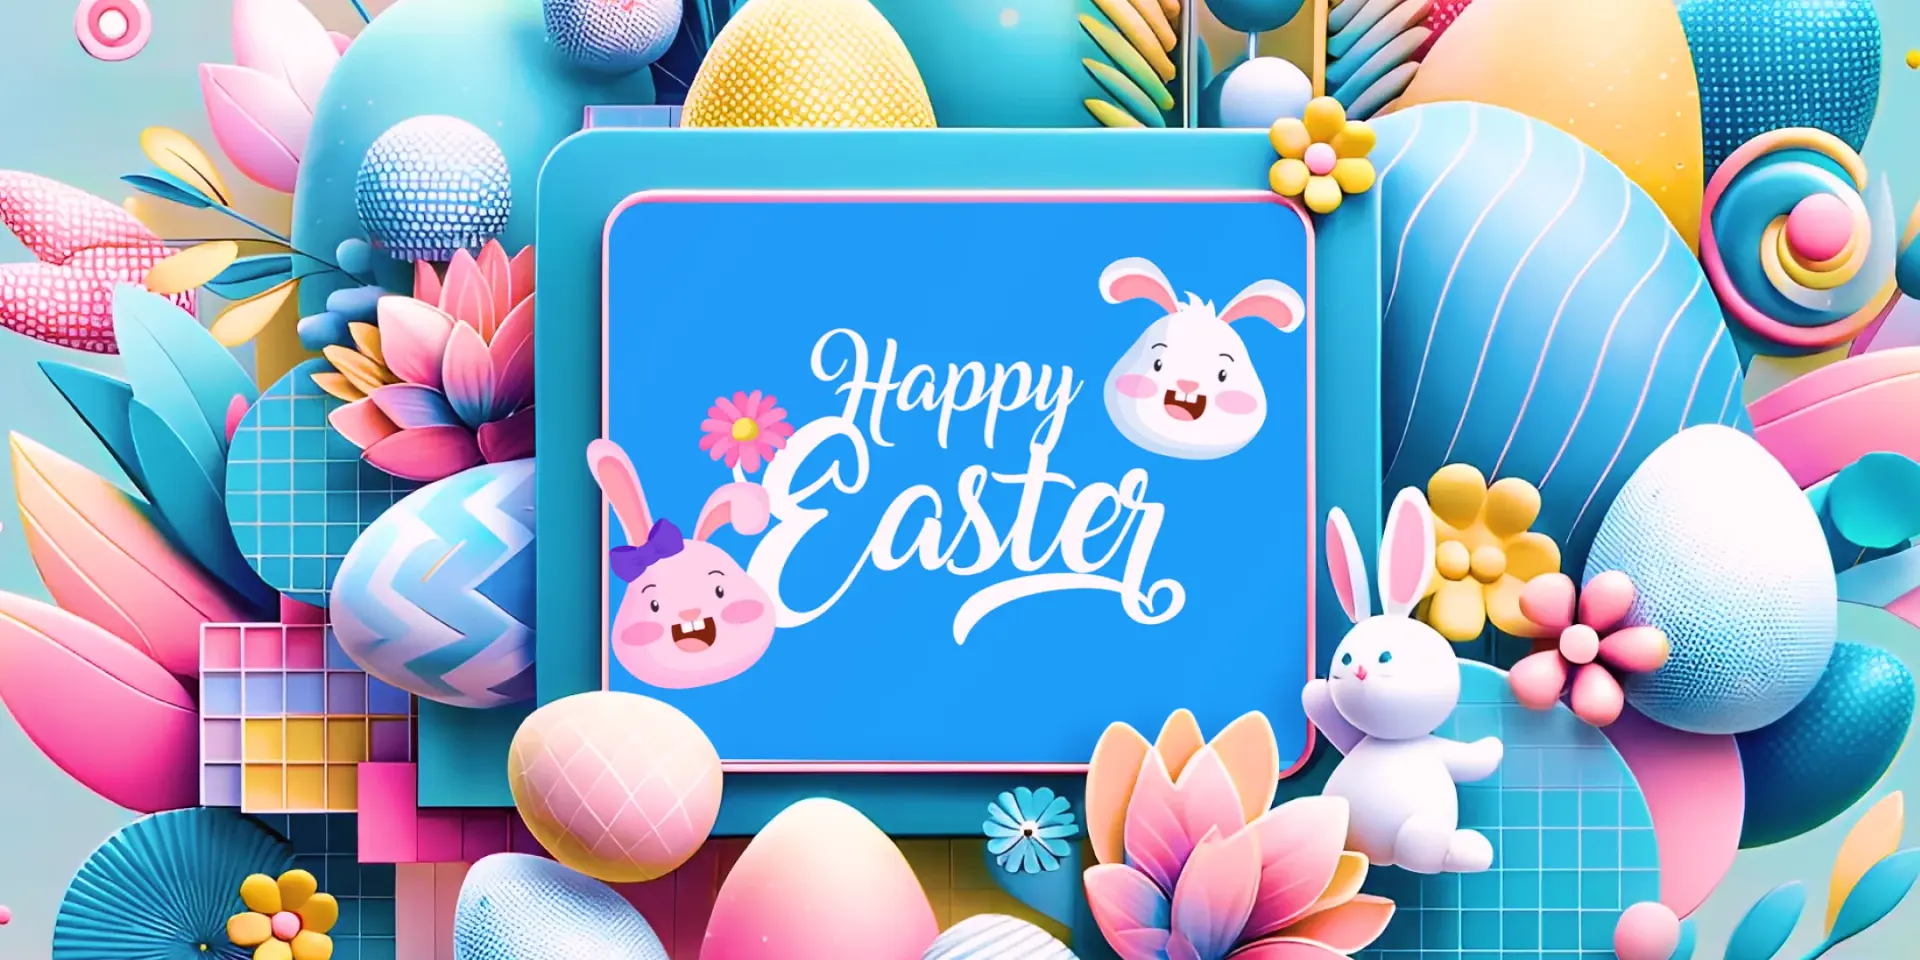 "Happy Easter" on a vibrant sky blue background, surrounded by an explosion of Easter-themed 3D illustrations (Easter eggs, bunnies, and flowers)